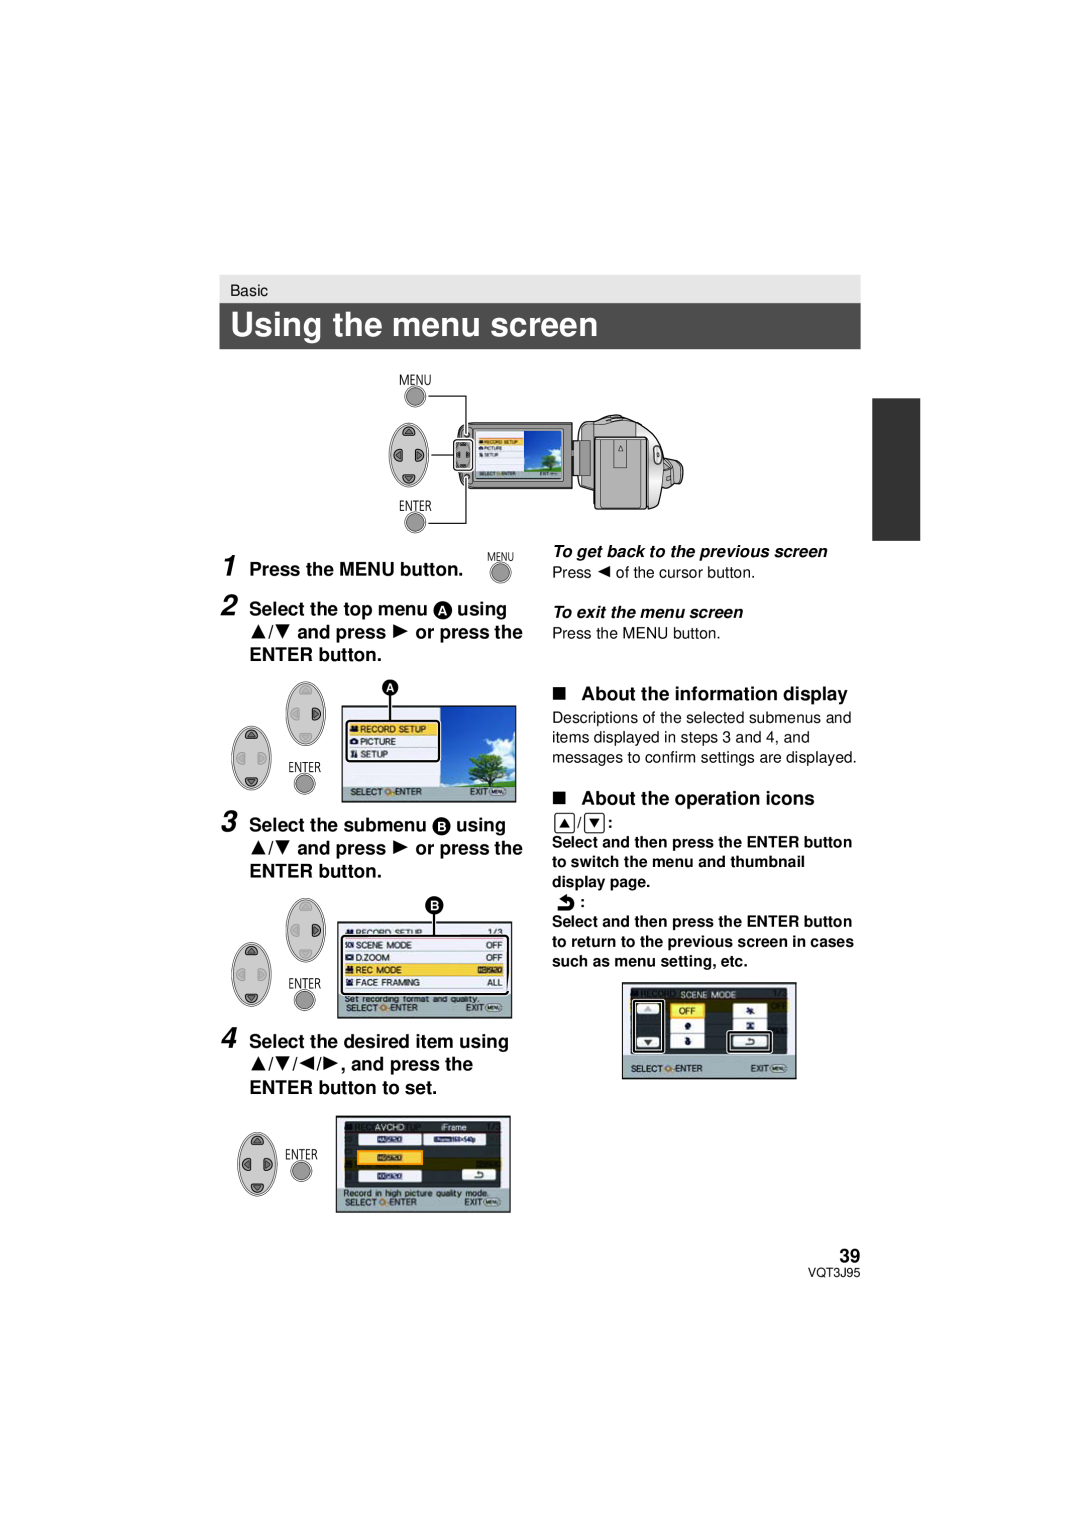 Panasonic HDC-SD40P/PC Using the menu screen, Press the MENU button, ∫ About the information display, ENTER button to set 